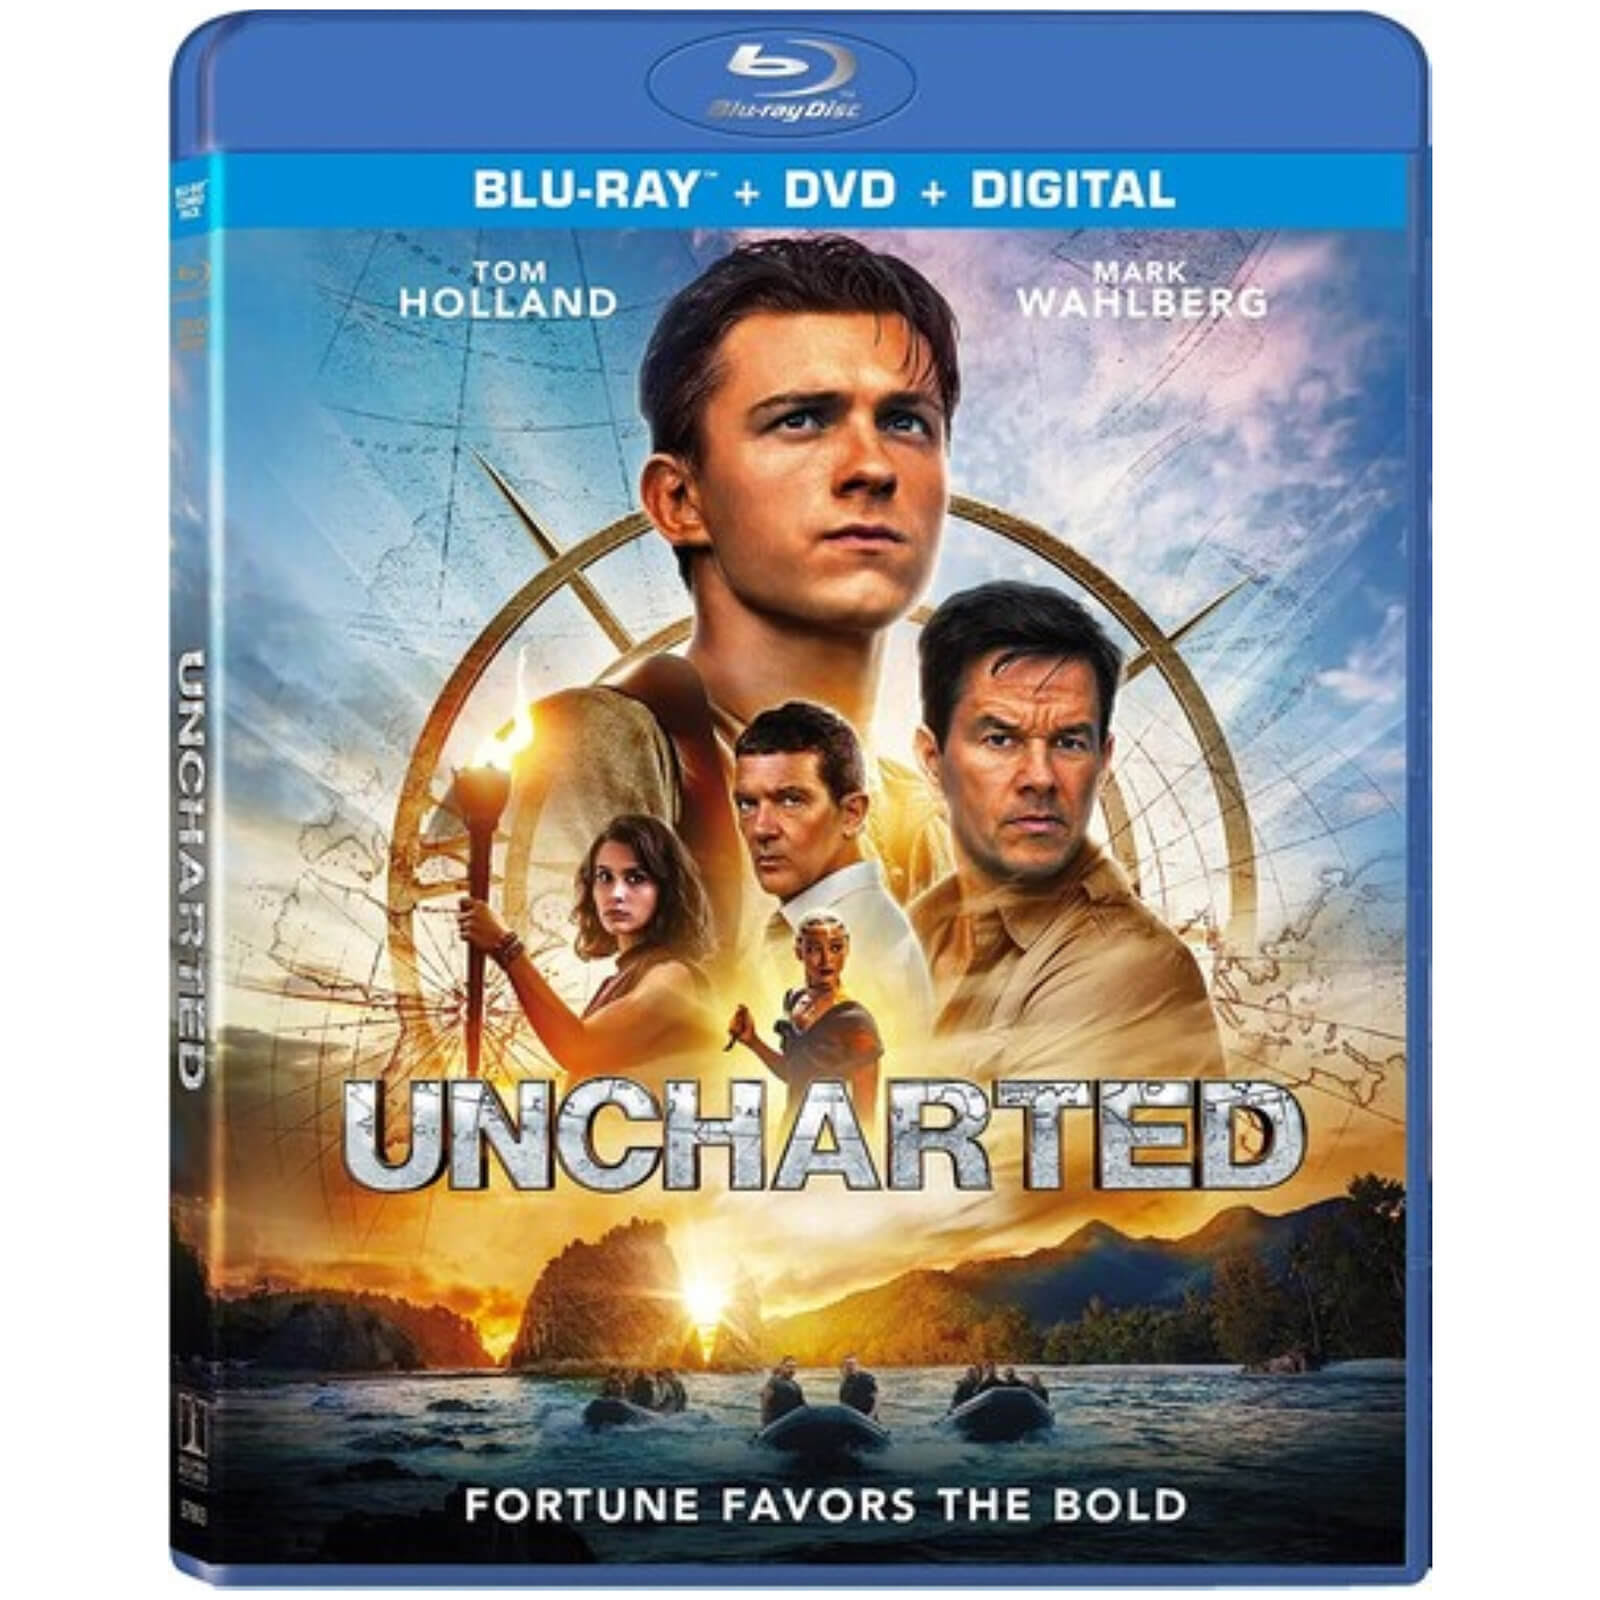 Uncharted (Includes DVD)